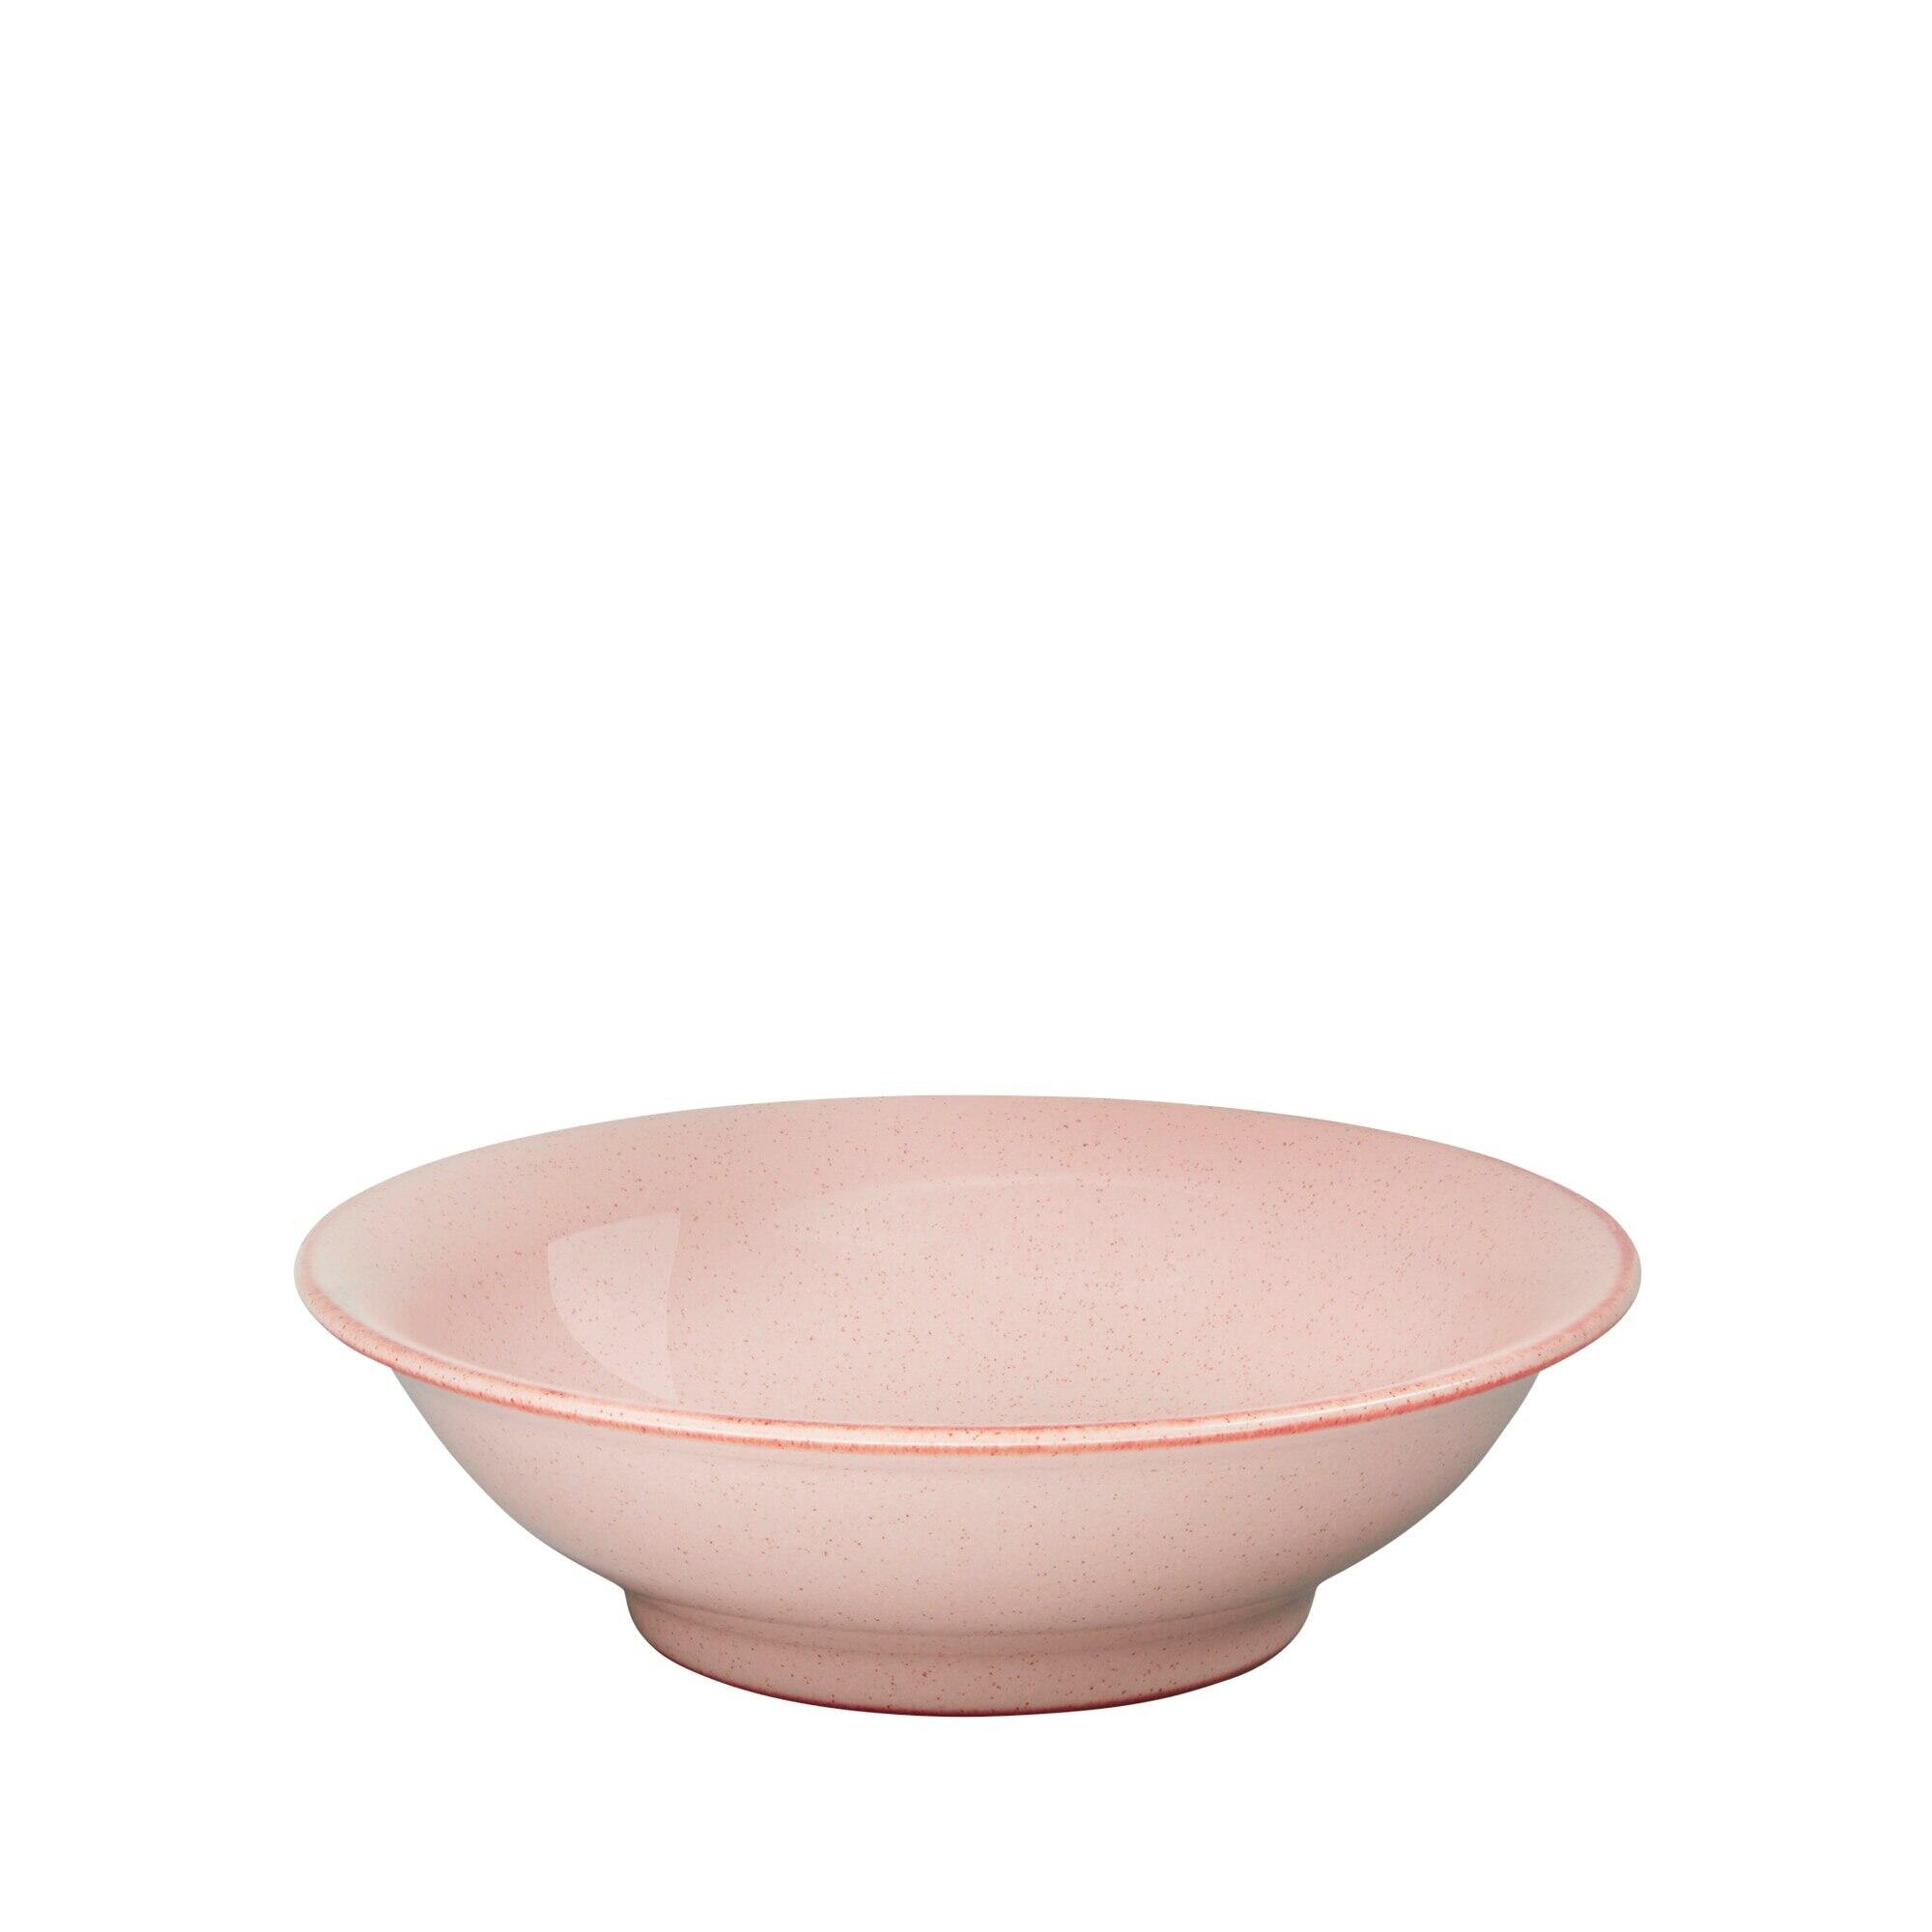 Heritage Piazza Small Shallow Bowl